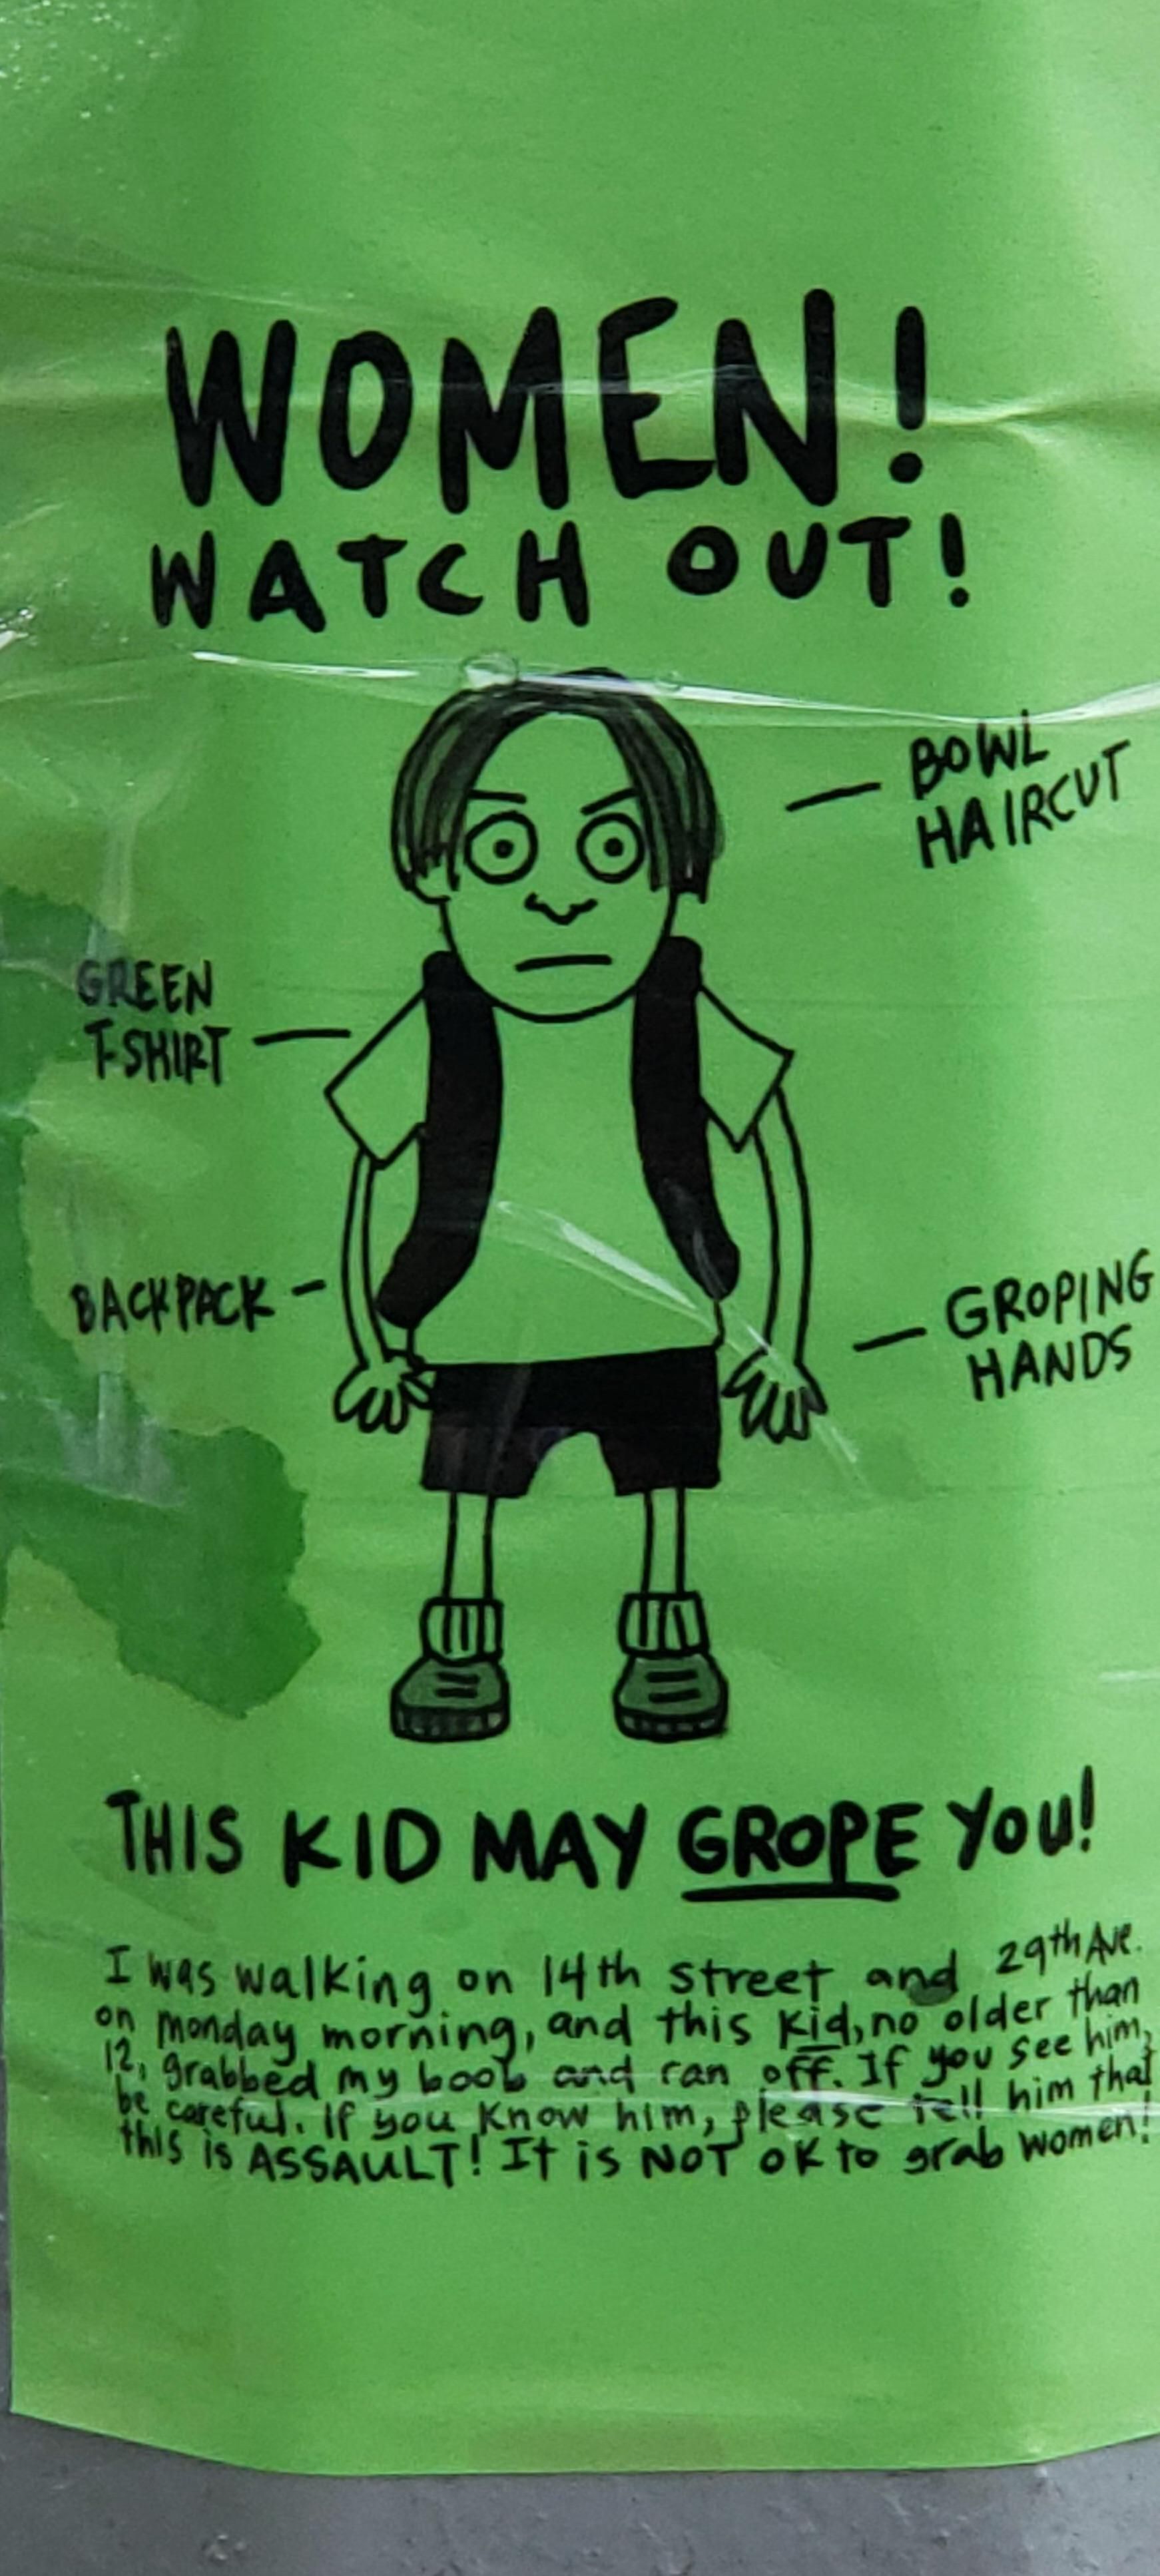 This sketch of a juvenile groper